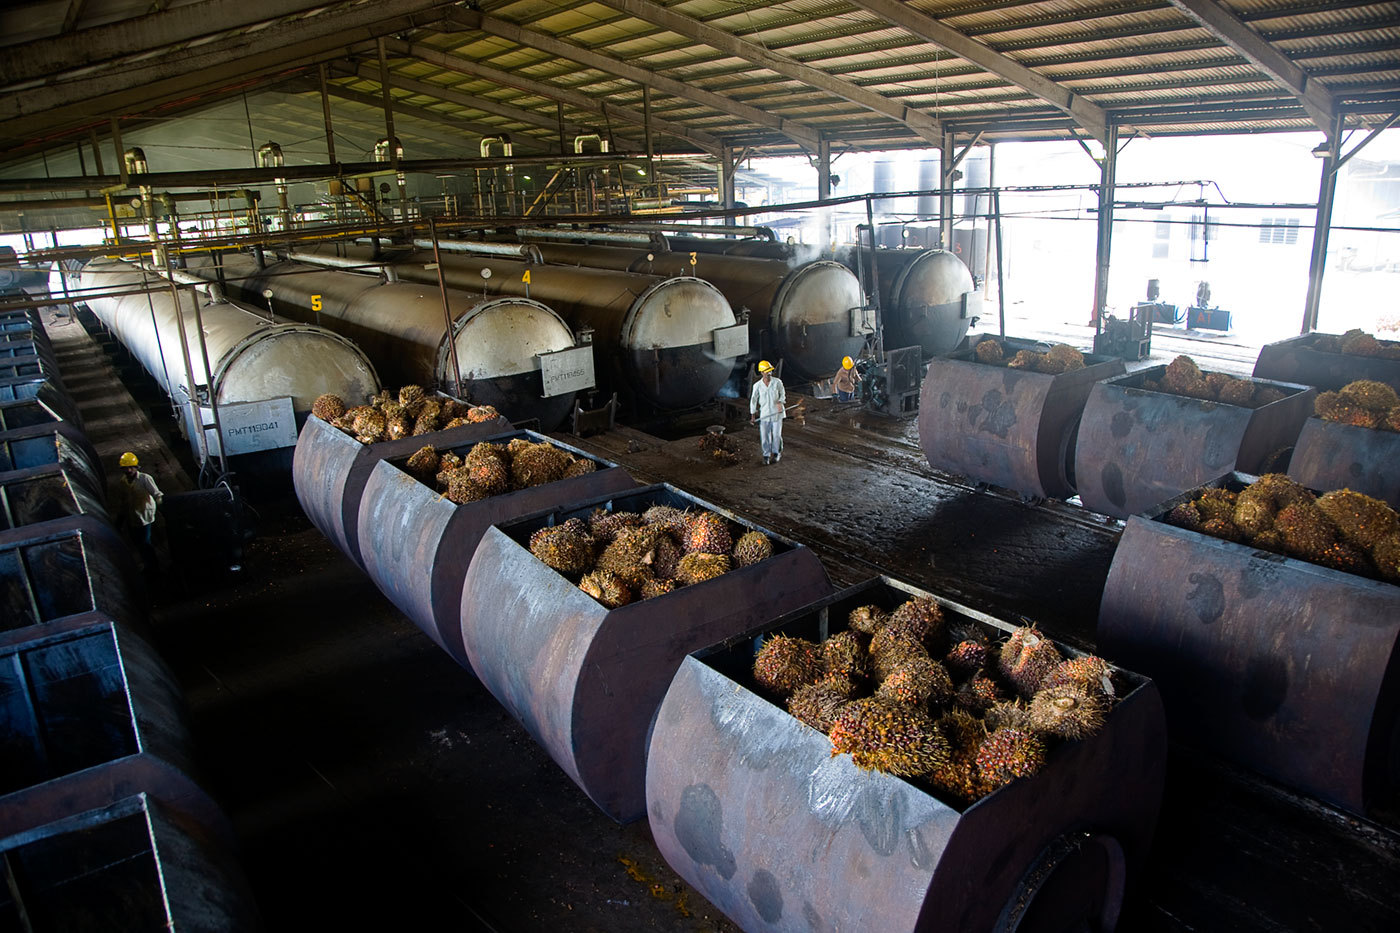 Palm oil fruit going into the pressure steam-cooking tanks : BUSINESS & INDUSTRY : Viviane Moos |  Documentary Photographer